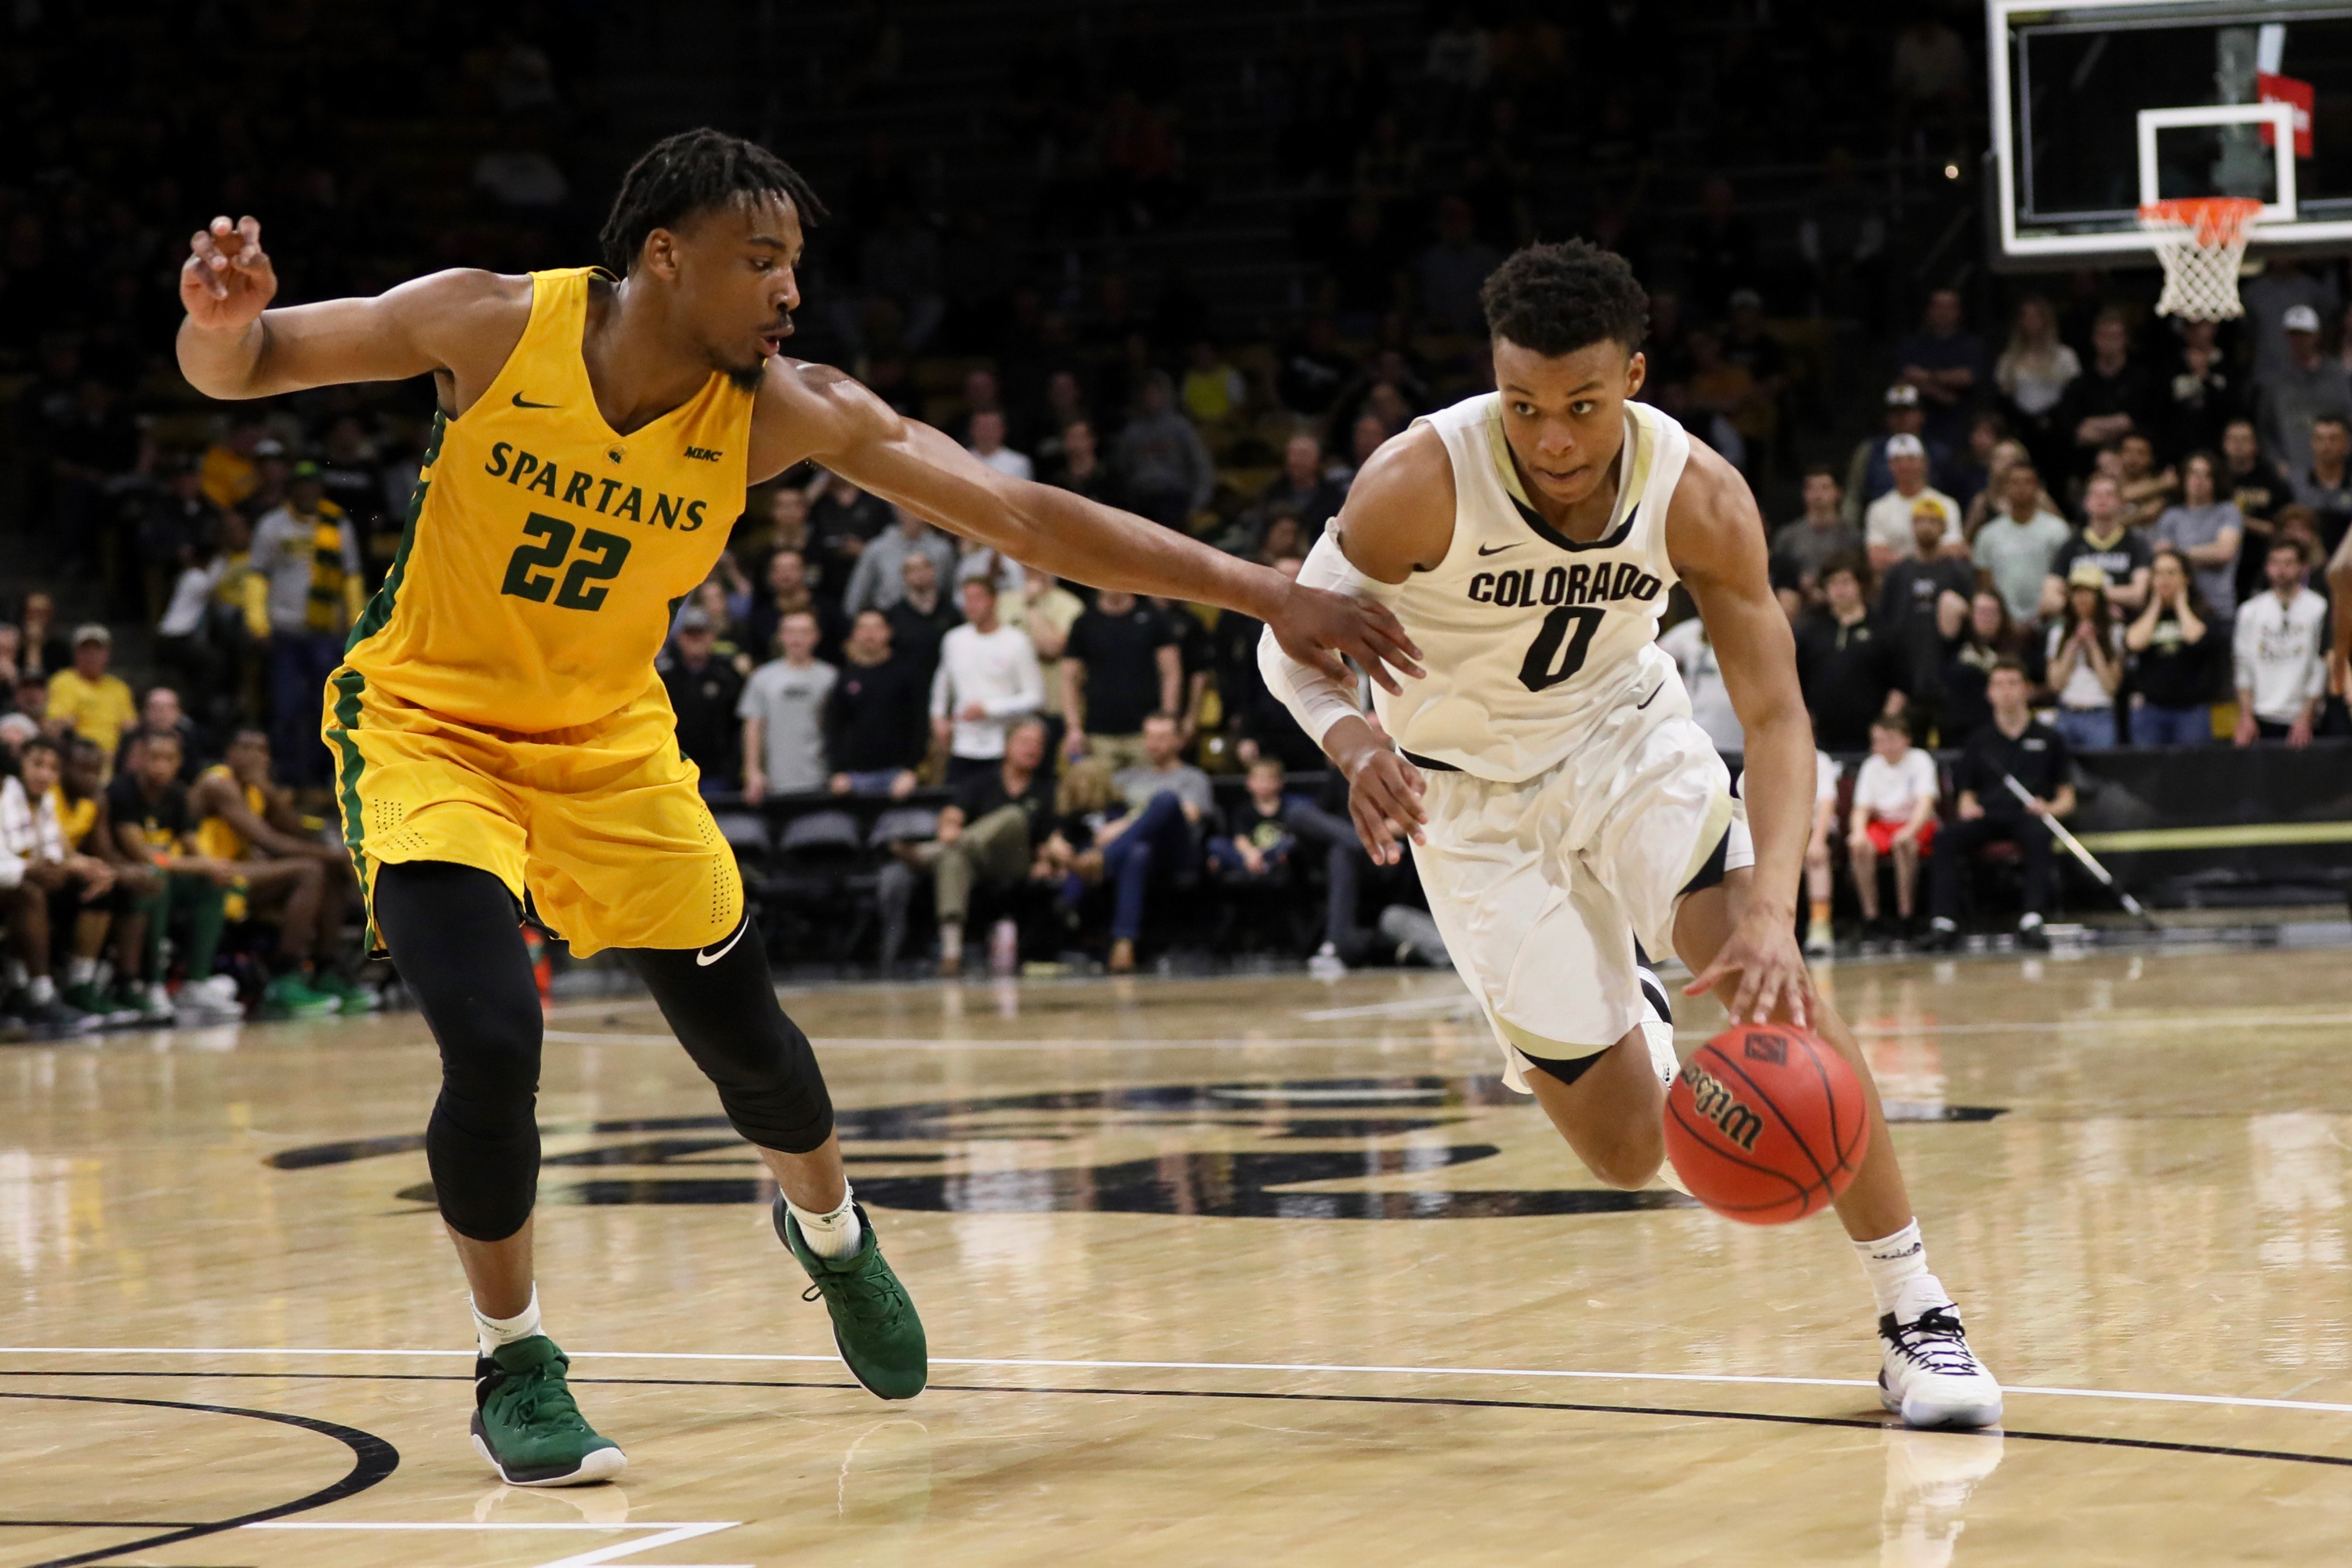 Buffs defeat Norfolk State in second round of NIT, 76-60